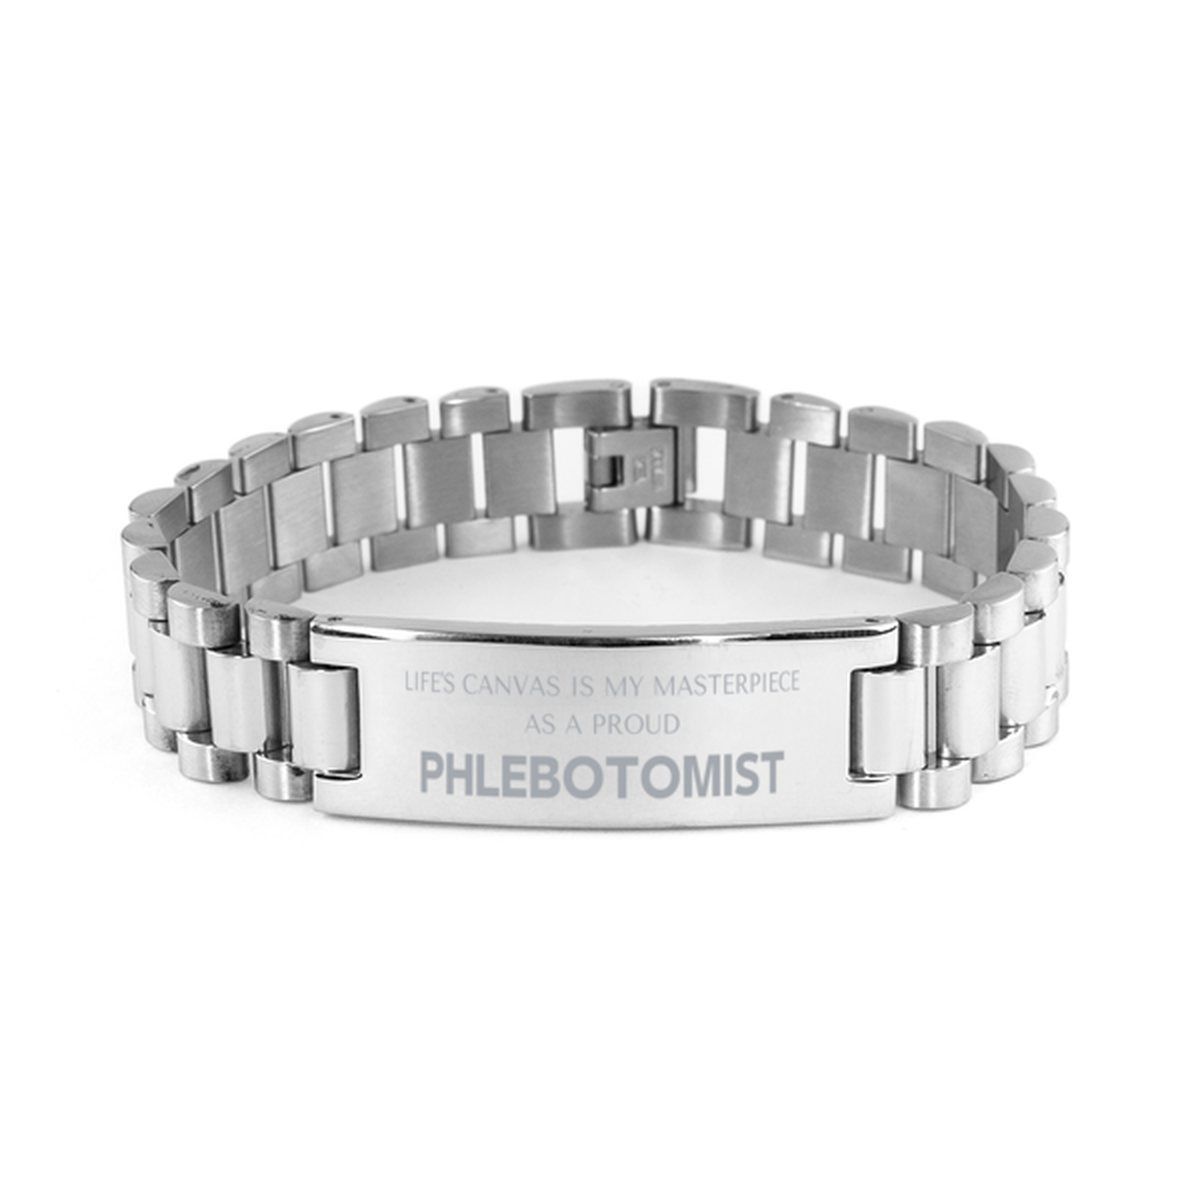 Proud Phlebotomist Gifts, Life's canvas is my masterpiece, Epic Birthday Christmas Unique Ladder Stainless Steel Bracelet For Phlebotomist, Coworkers, Men, Women, Friends